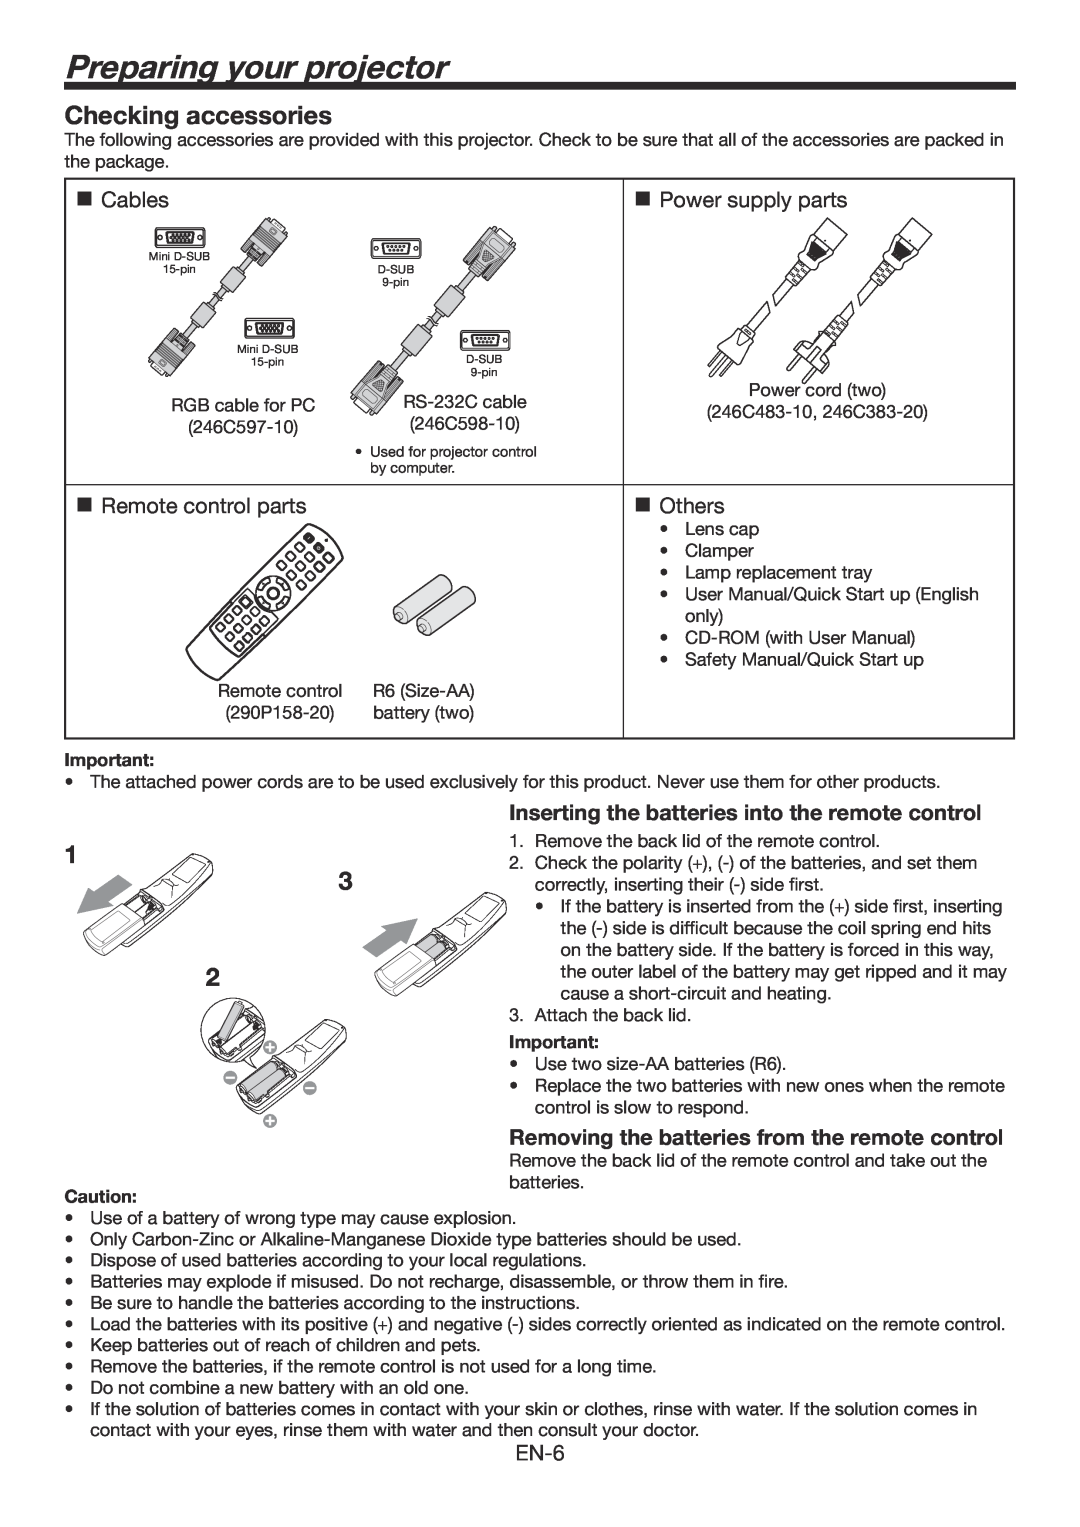 Mitsubishi Electronics HC6800 user manual Preparing your projector, Checking accessories 